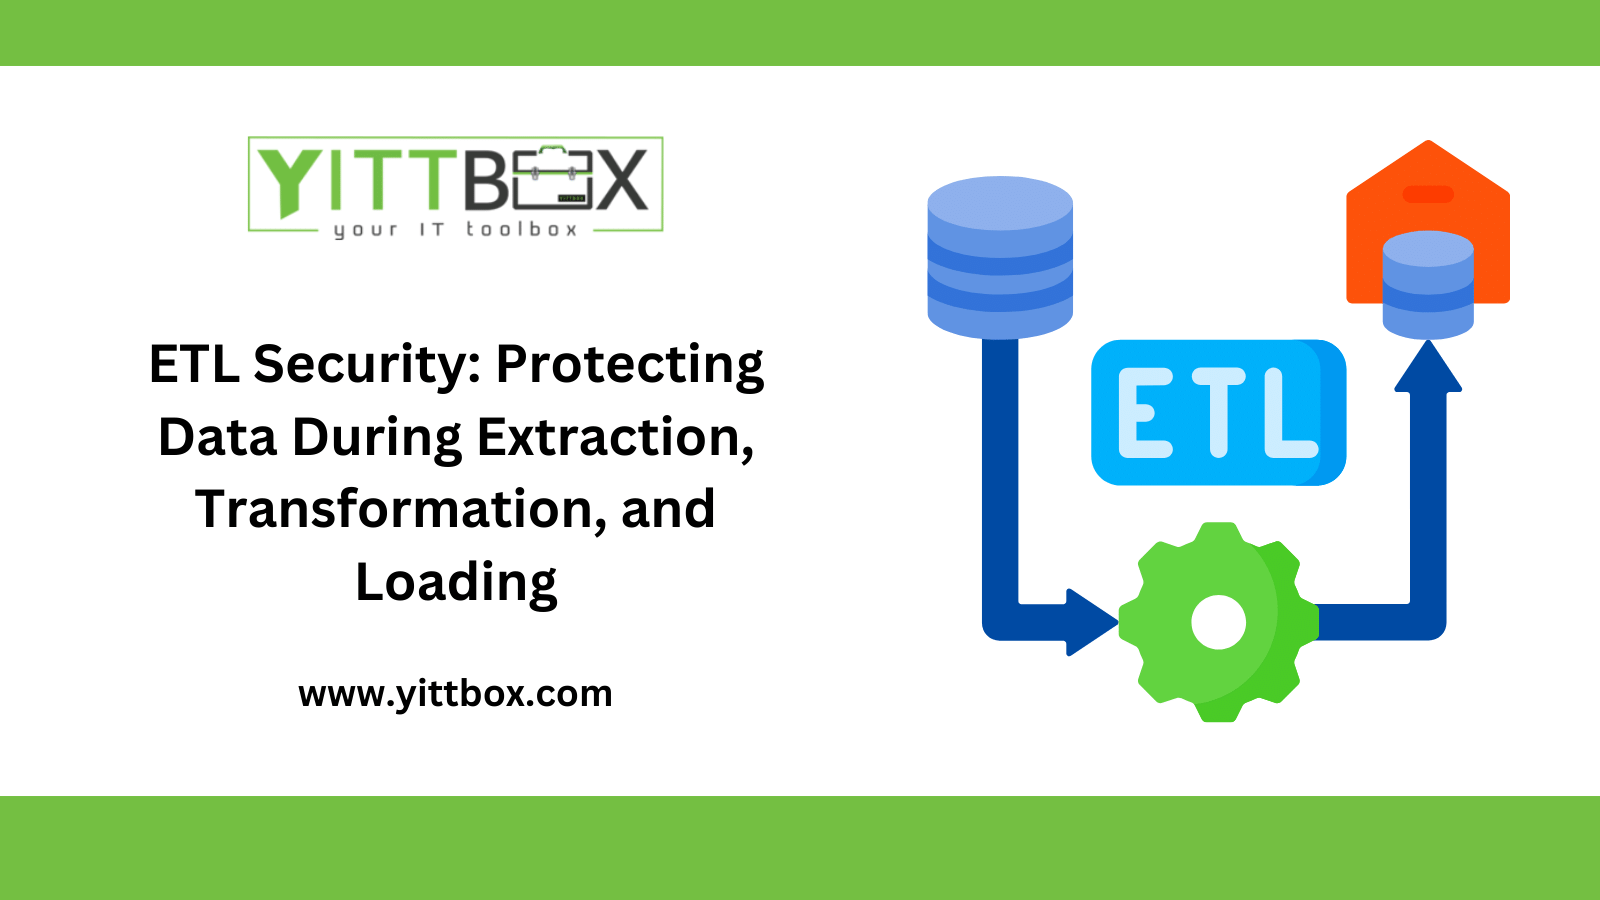 ETL Security: Protecting Data During Extraction, Transformation, and Loading